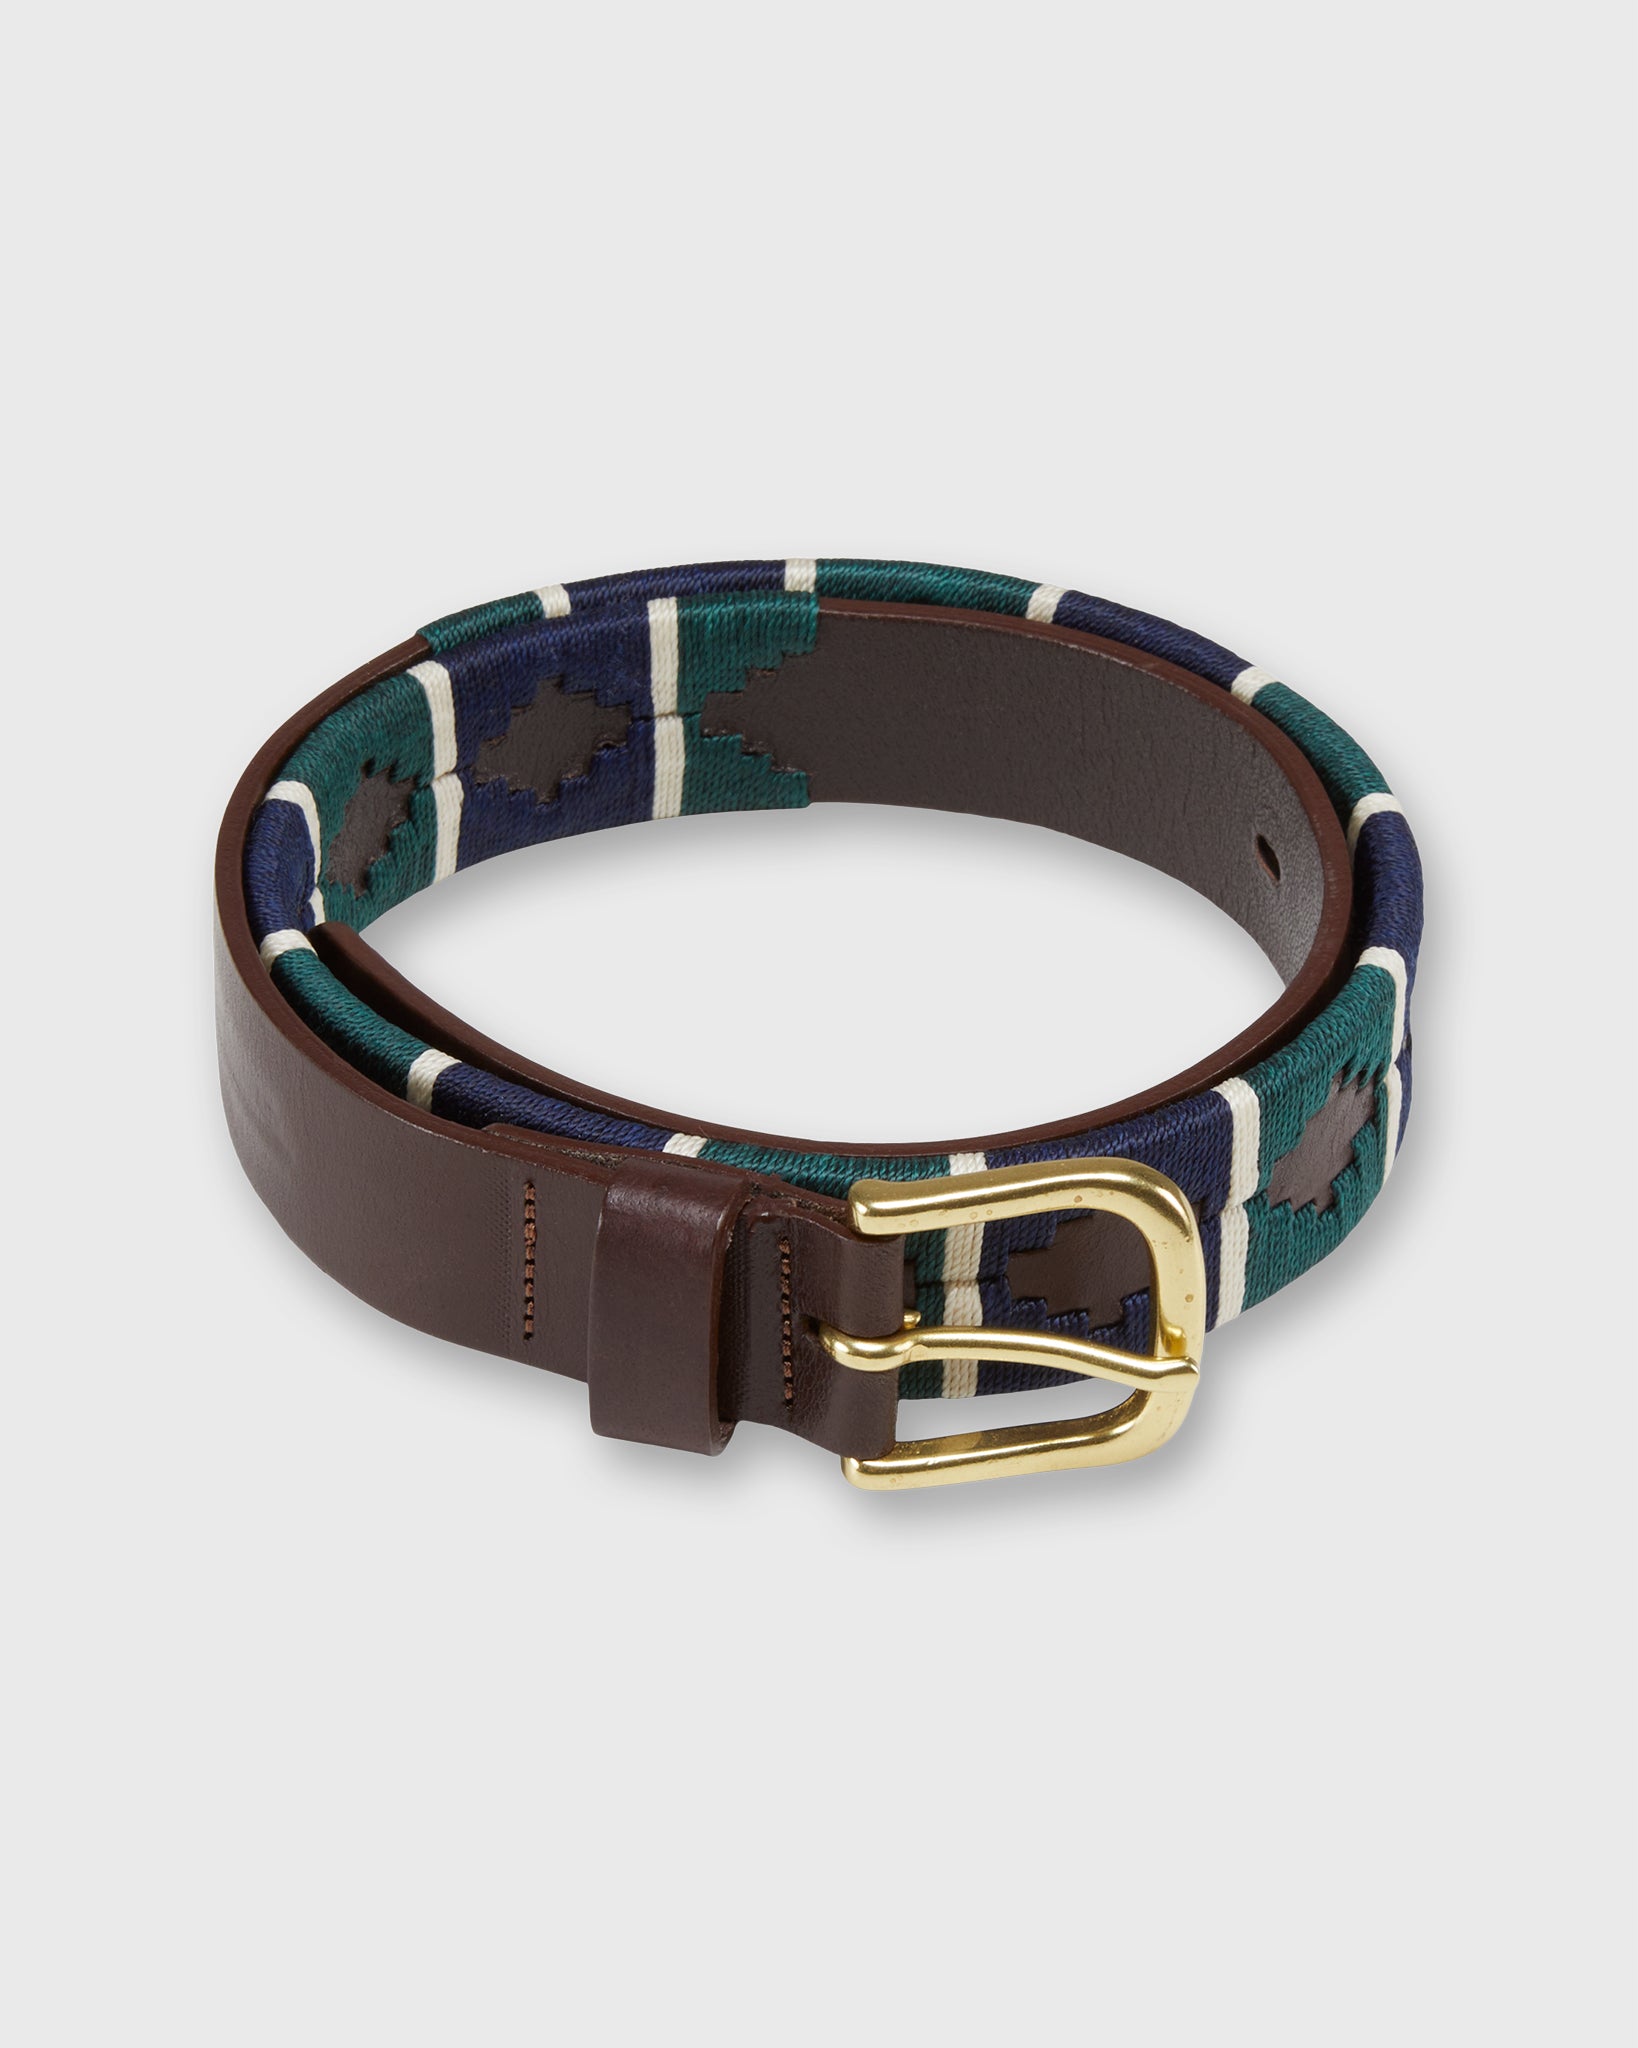 1 1/8" Polo Belt in Green/Navy/Bone Chocolate Leather